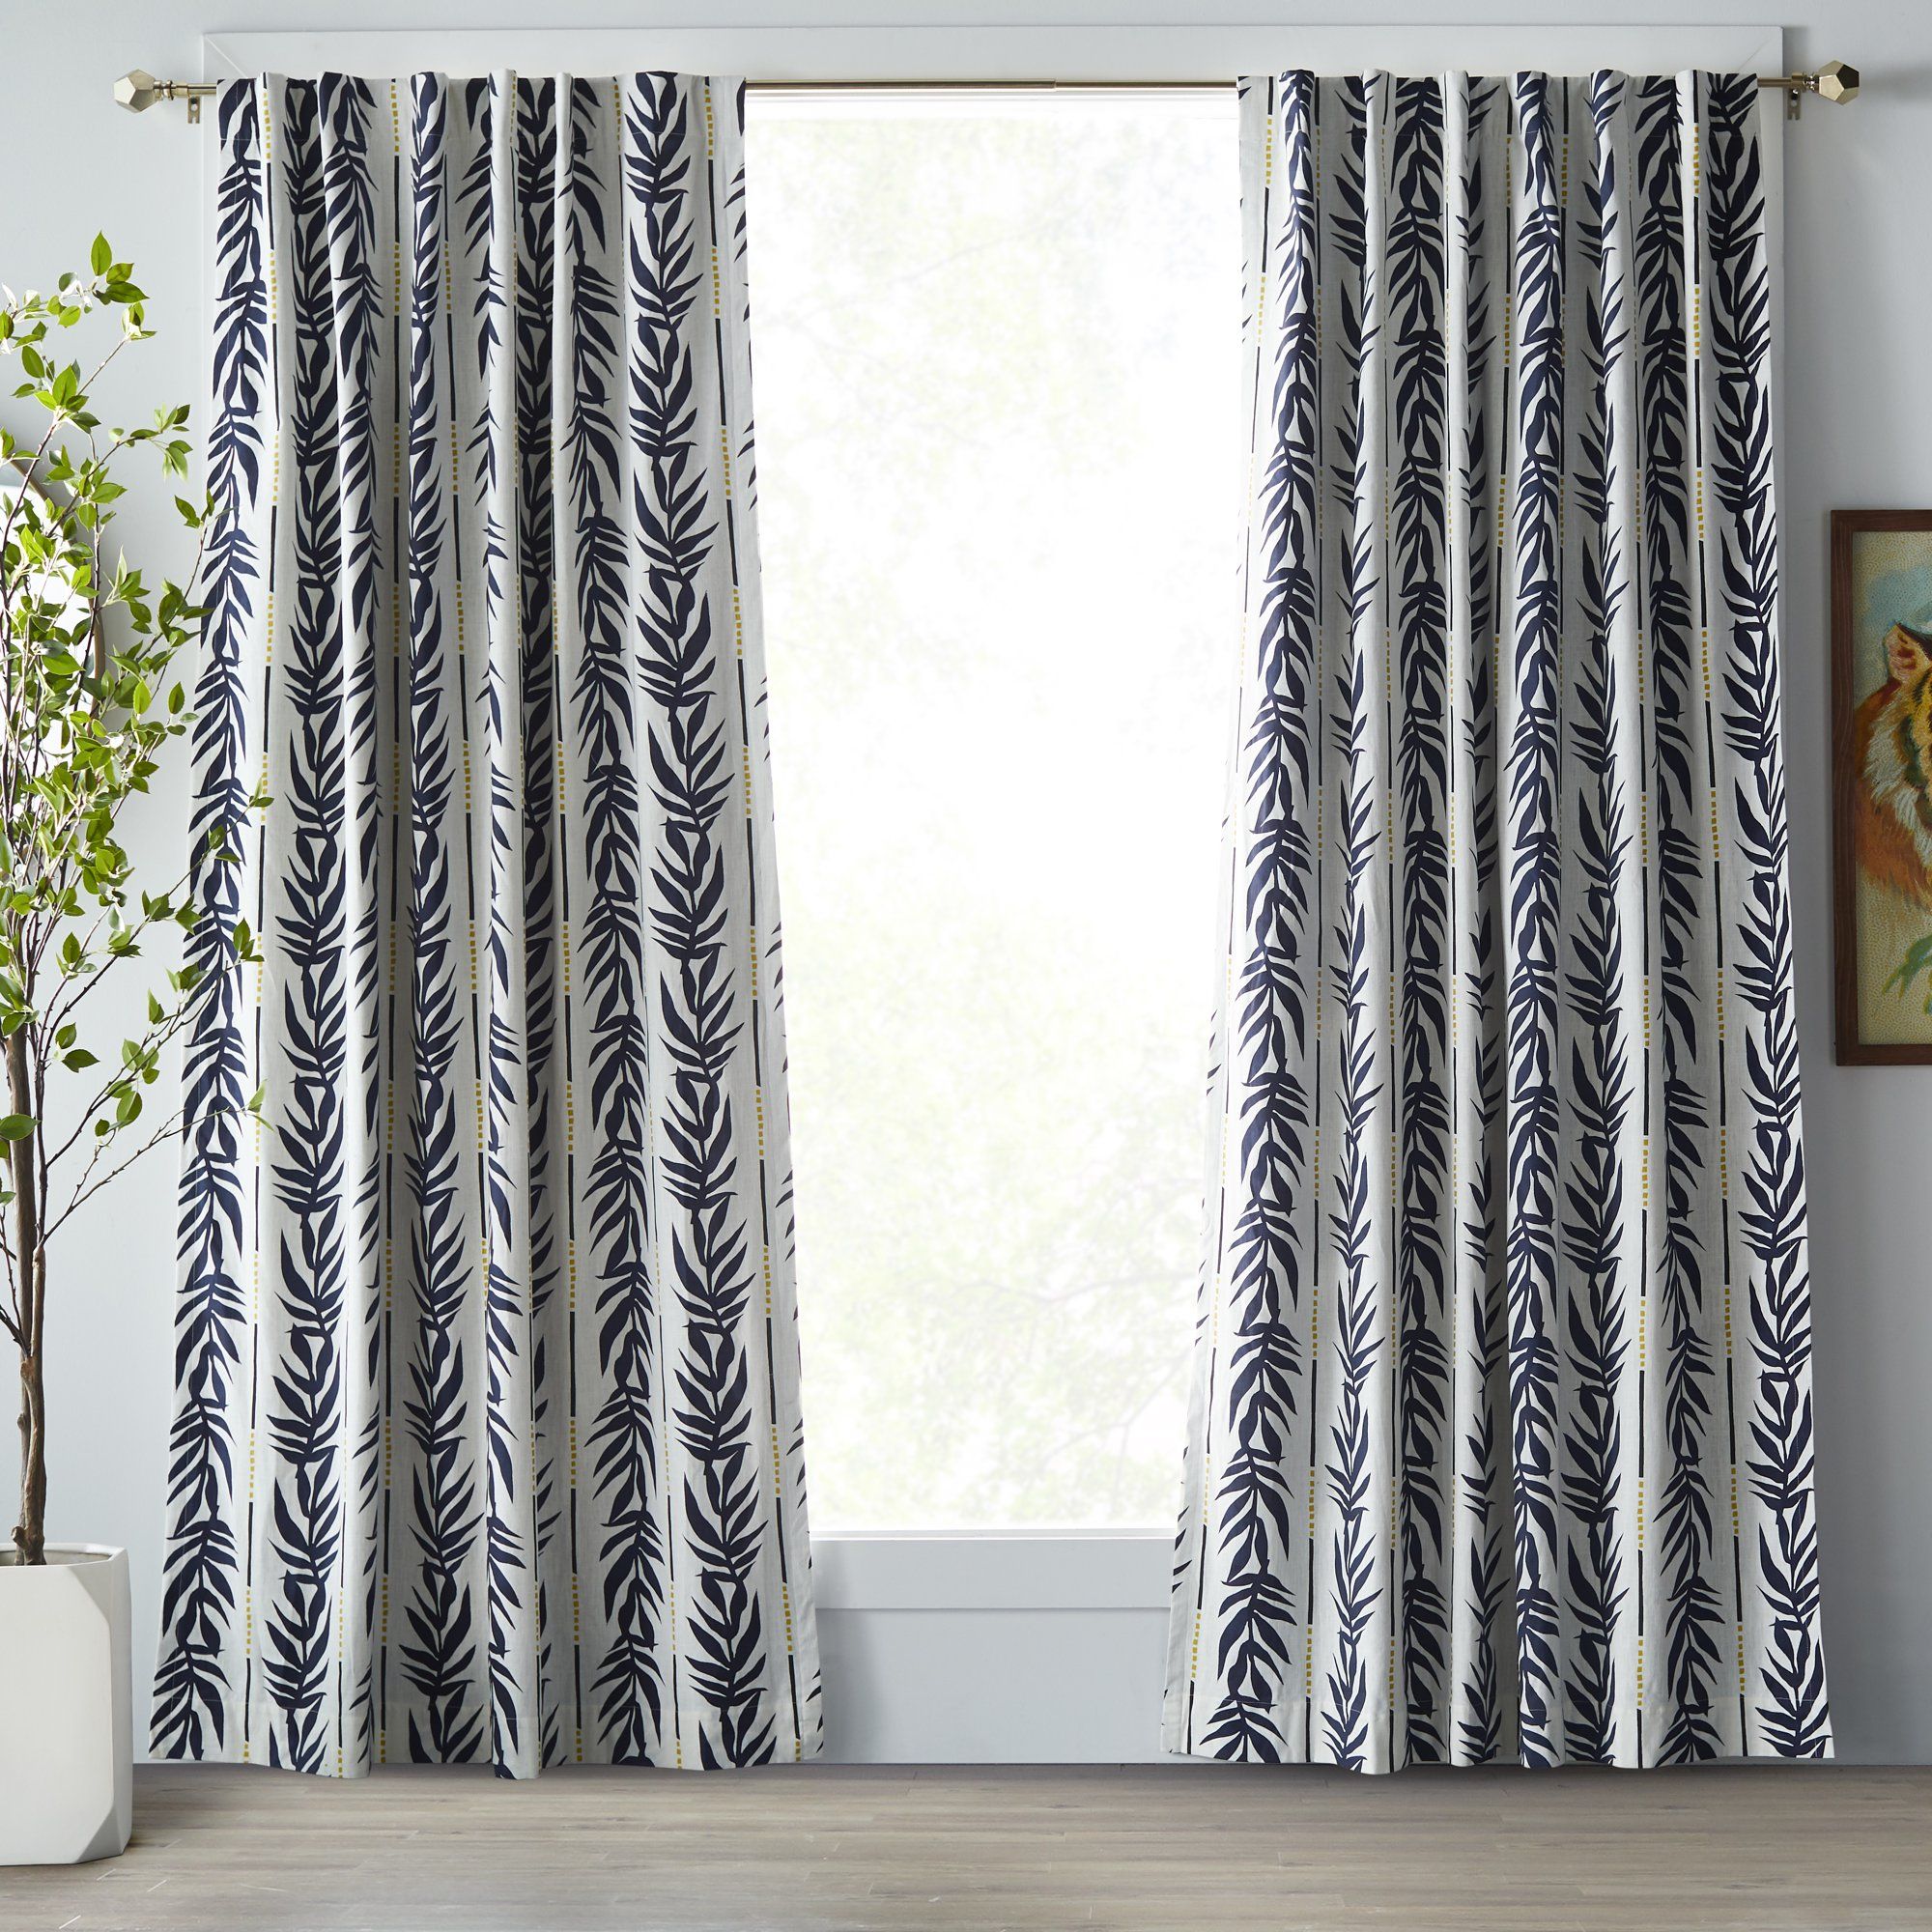 Where to Buy Curtains - Best Places to 